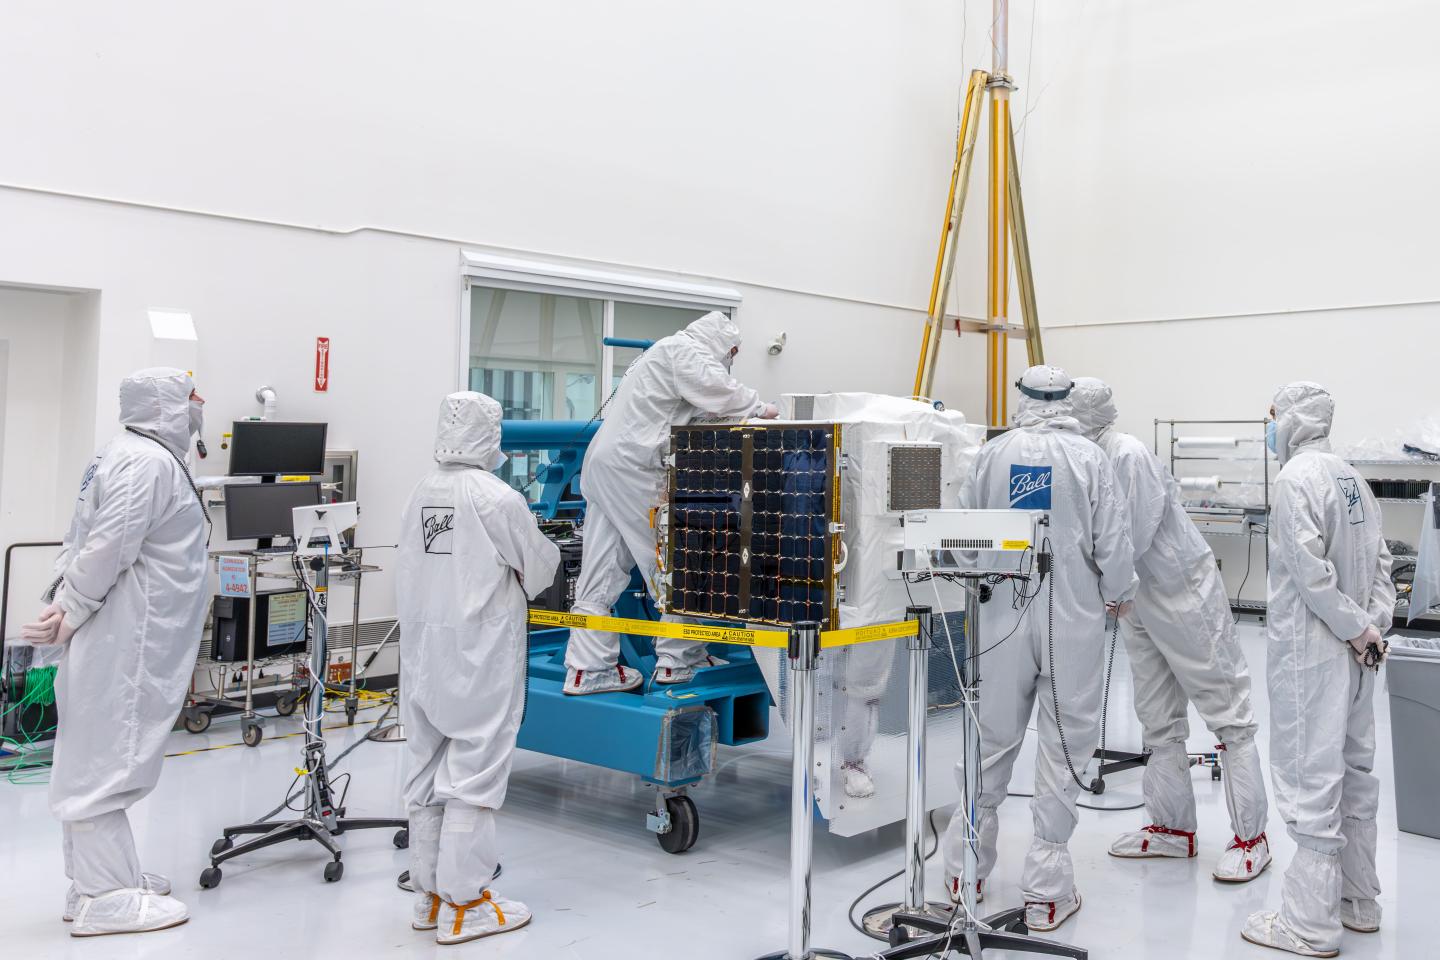 A team of scientists in sterile white jumpsuits from Ball Aeronautics work on MethaneSAT